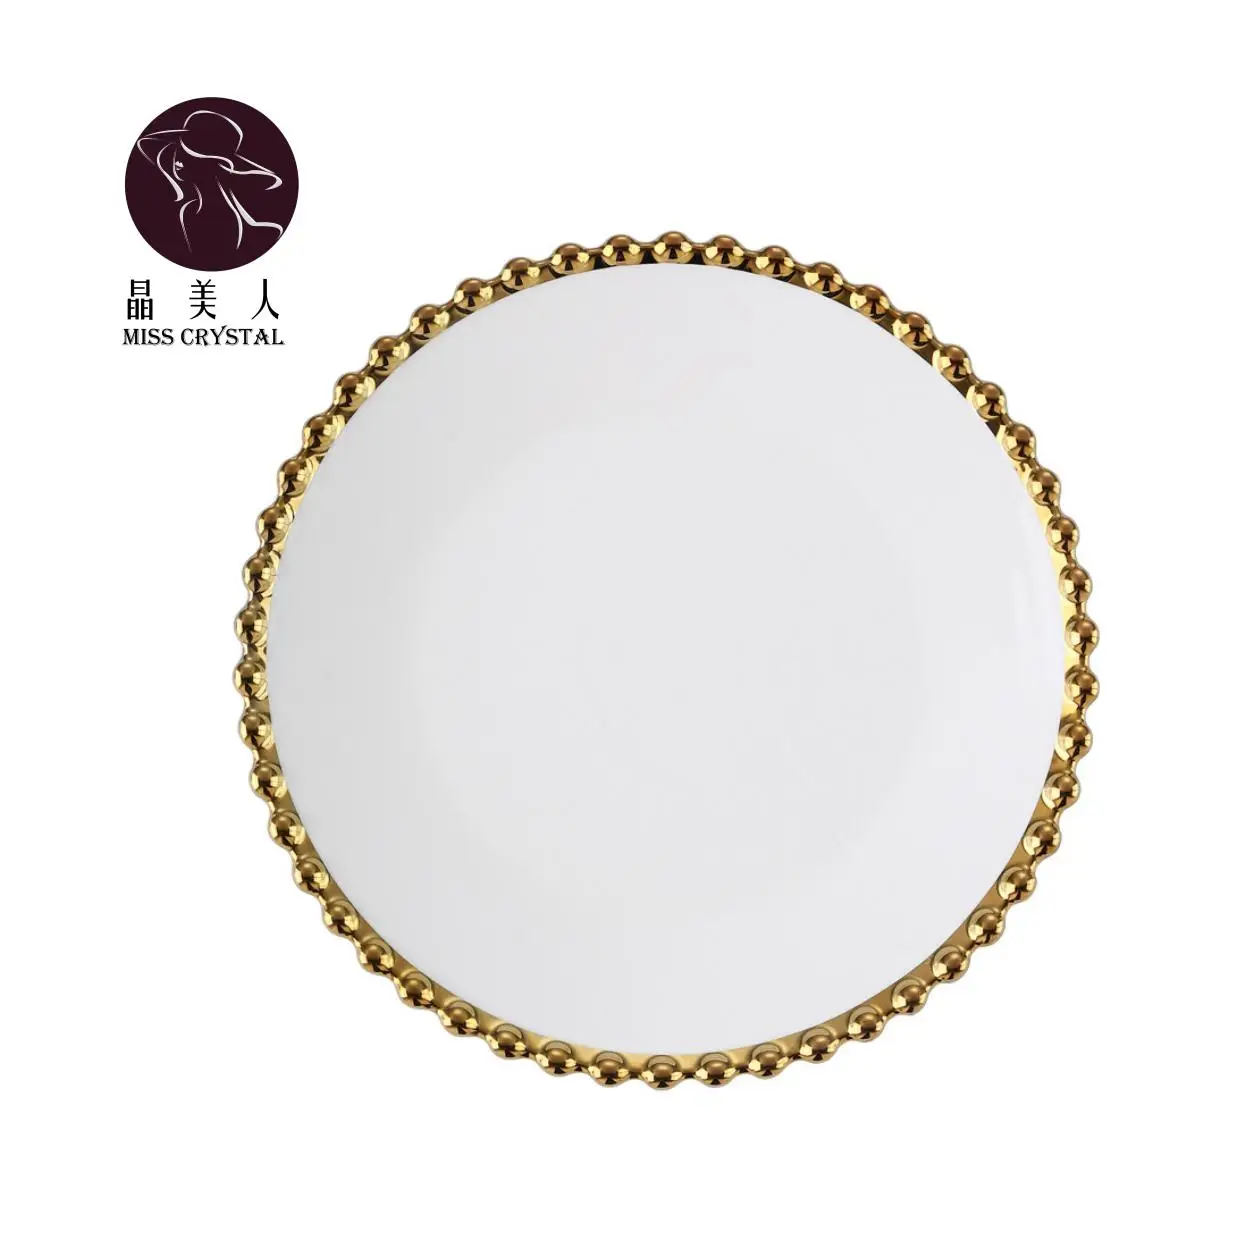 

2021 Hot Sales White Color Relief Beads Ceramic Plate Handmade Pearl Steak Pasta Dinner Plates Soup Bowls Tableware